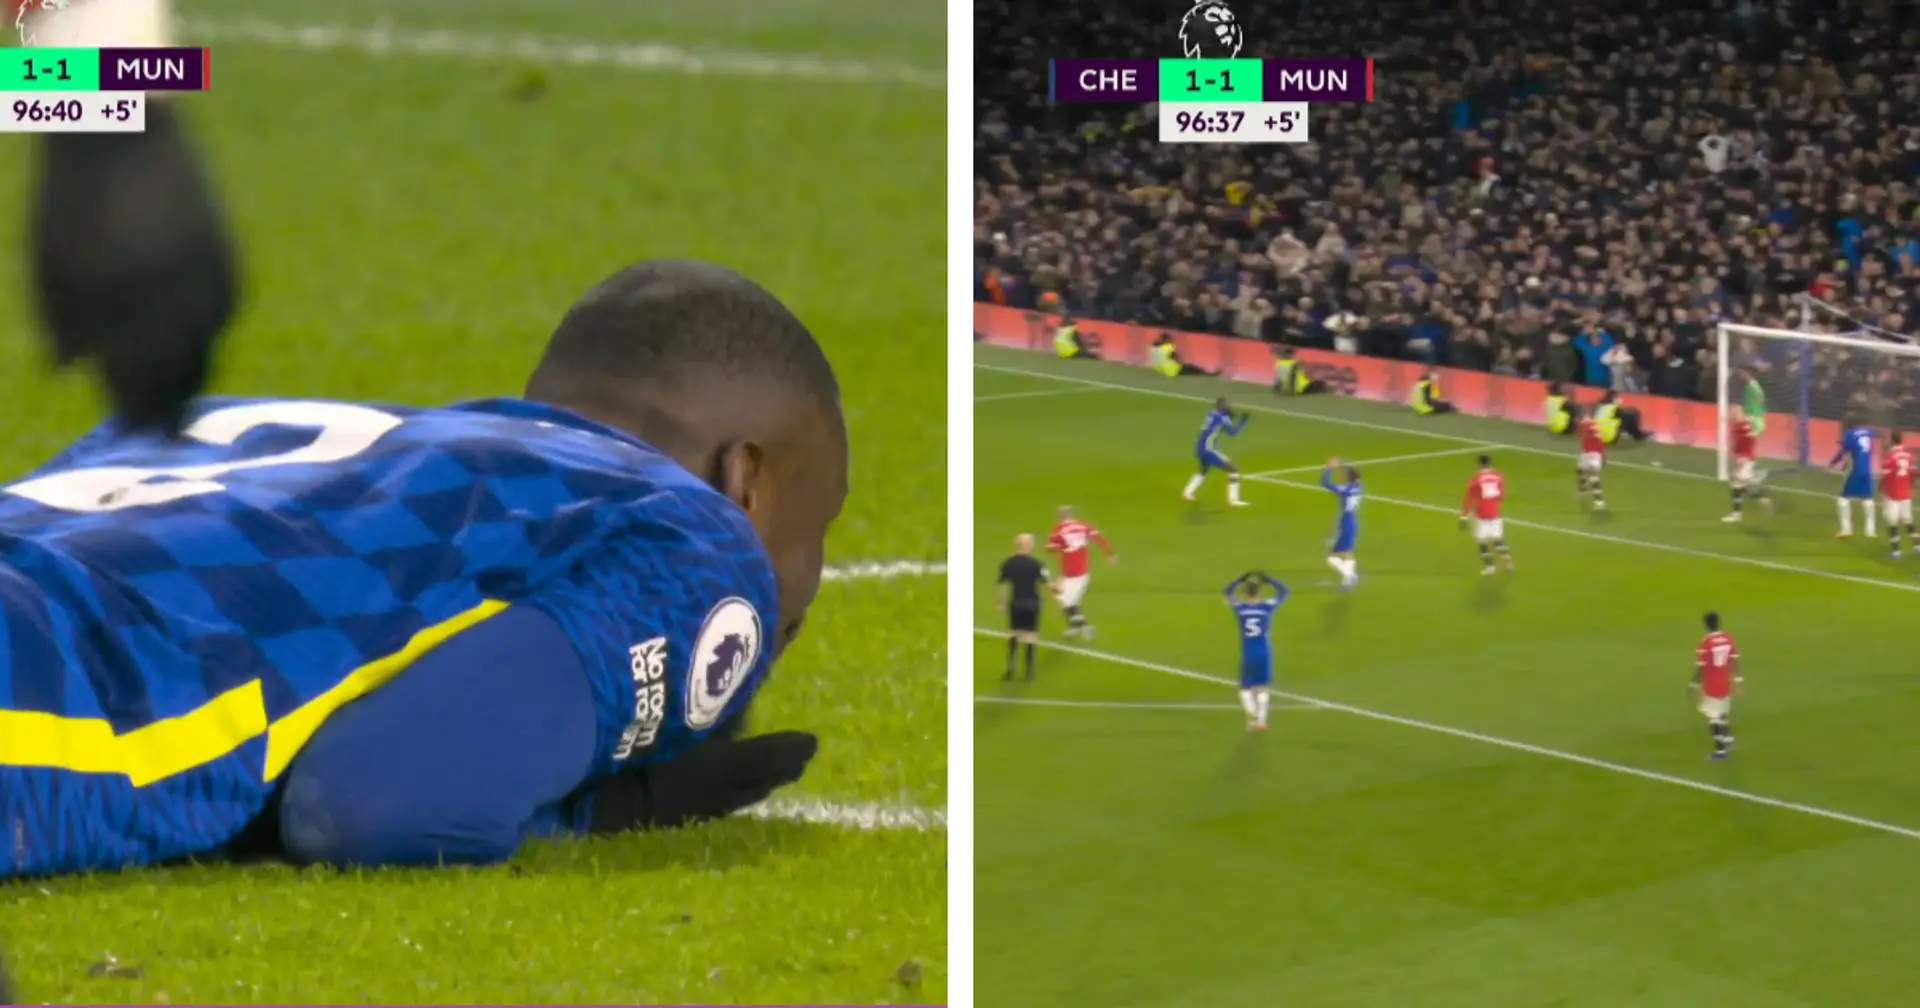 Antonio Rudiger misses golden chance to win United game for Chelsea - players' reaction says it all